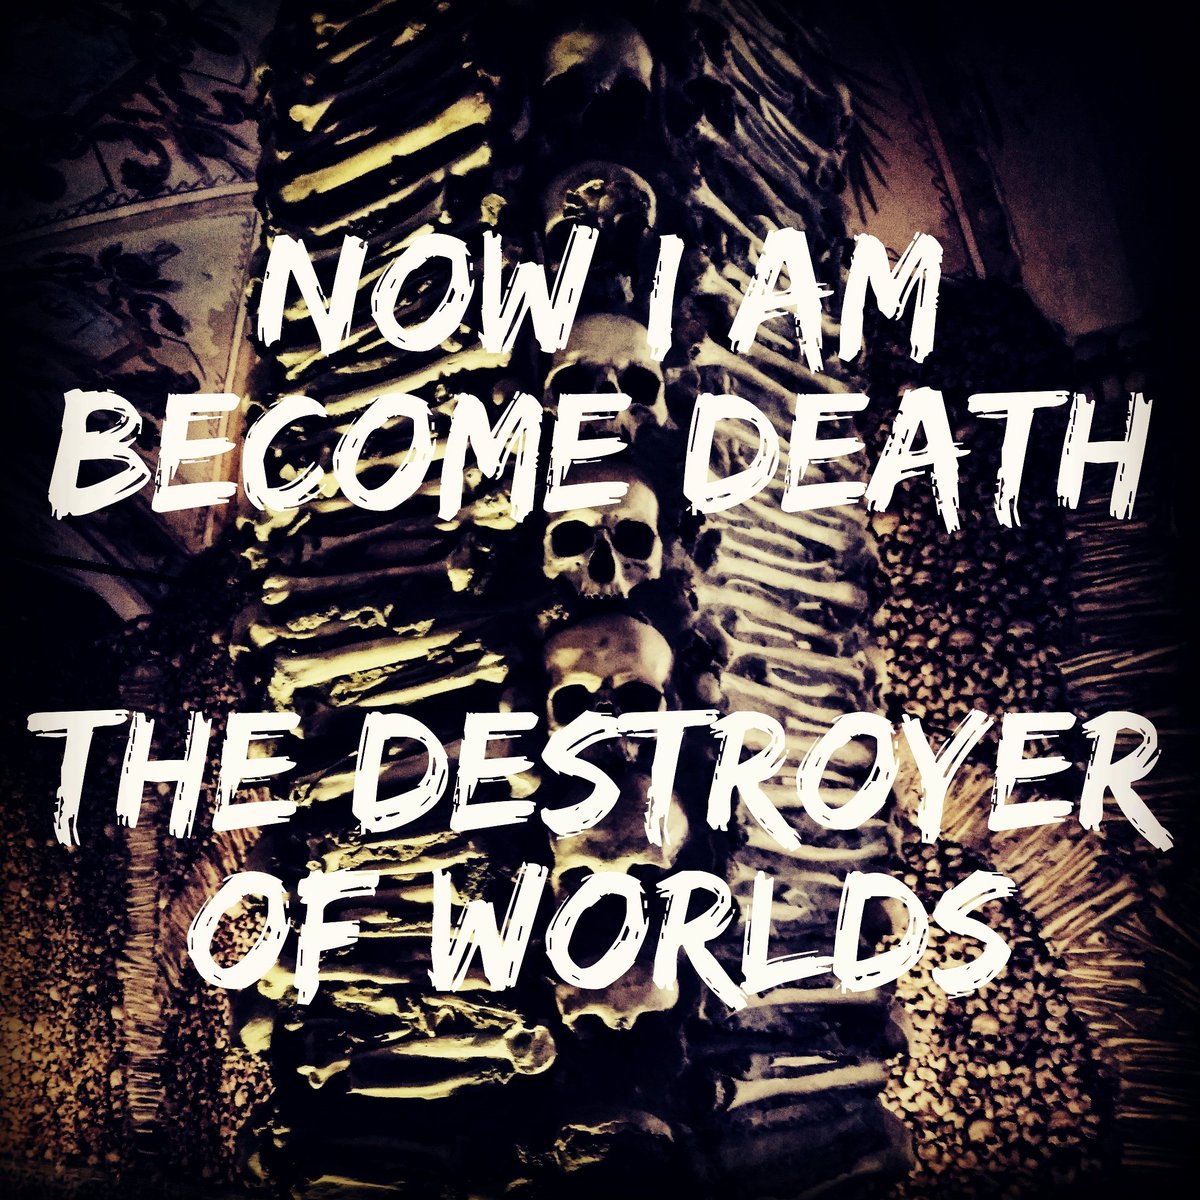 NOW I AM BECOME DEATH
THE DESTROYER OF WORLDS

#thelastbearender #tlbe #nowiambecomedeaththedestroyerofworlds #nowiambecomedeath #thedestroyerofworlds #firstrelease #firstspotifyrelease #nuclearblast #nuclearweapon #oppenheimer #industrialmetal